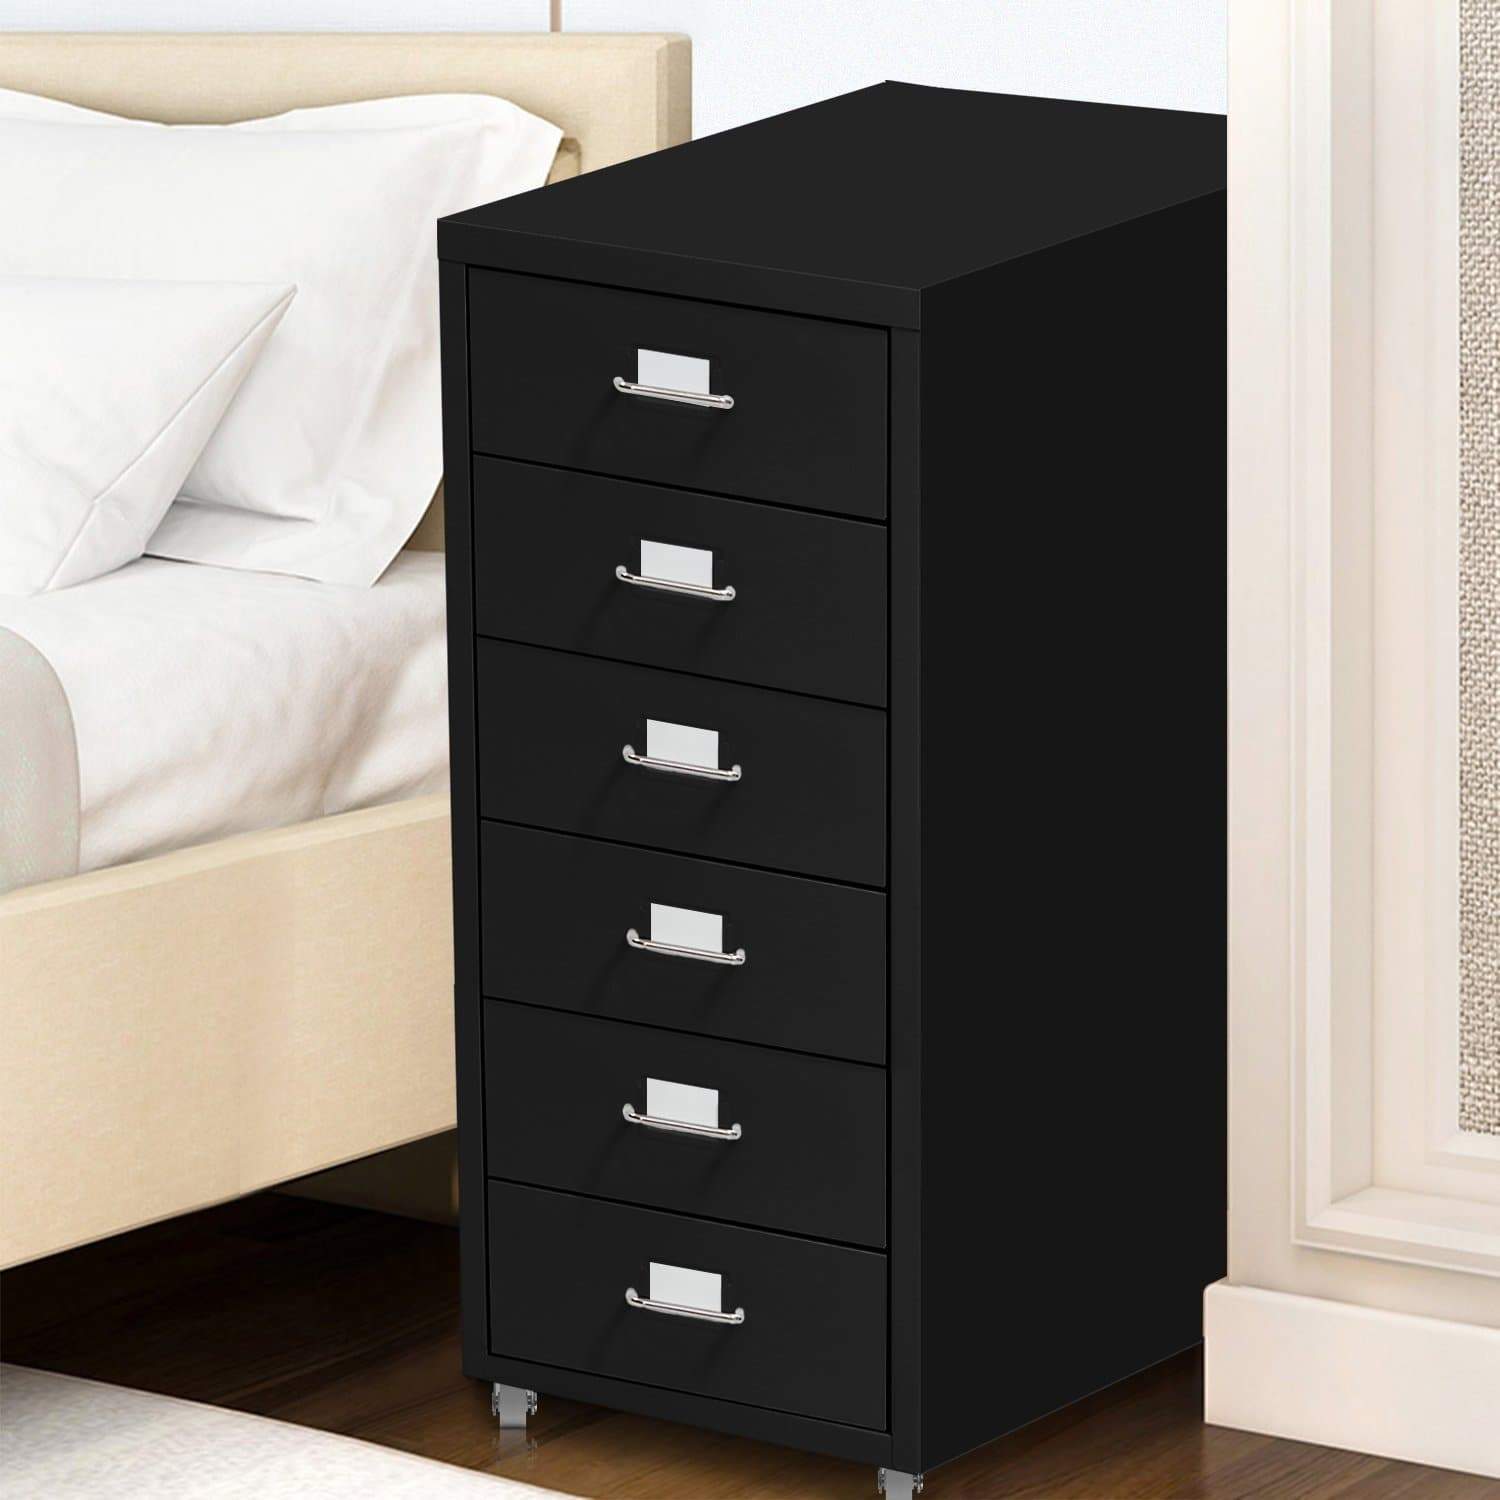 office & study 6 Tiers Steel Orgainer Metal File Cabinet With Drawers Office Furniture Black